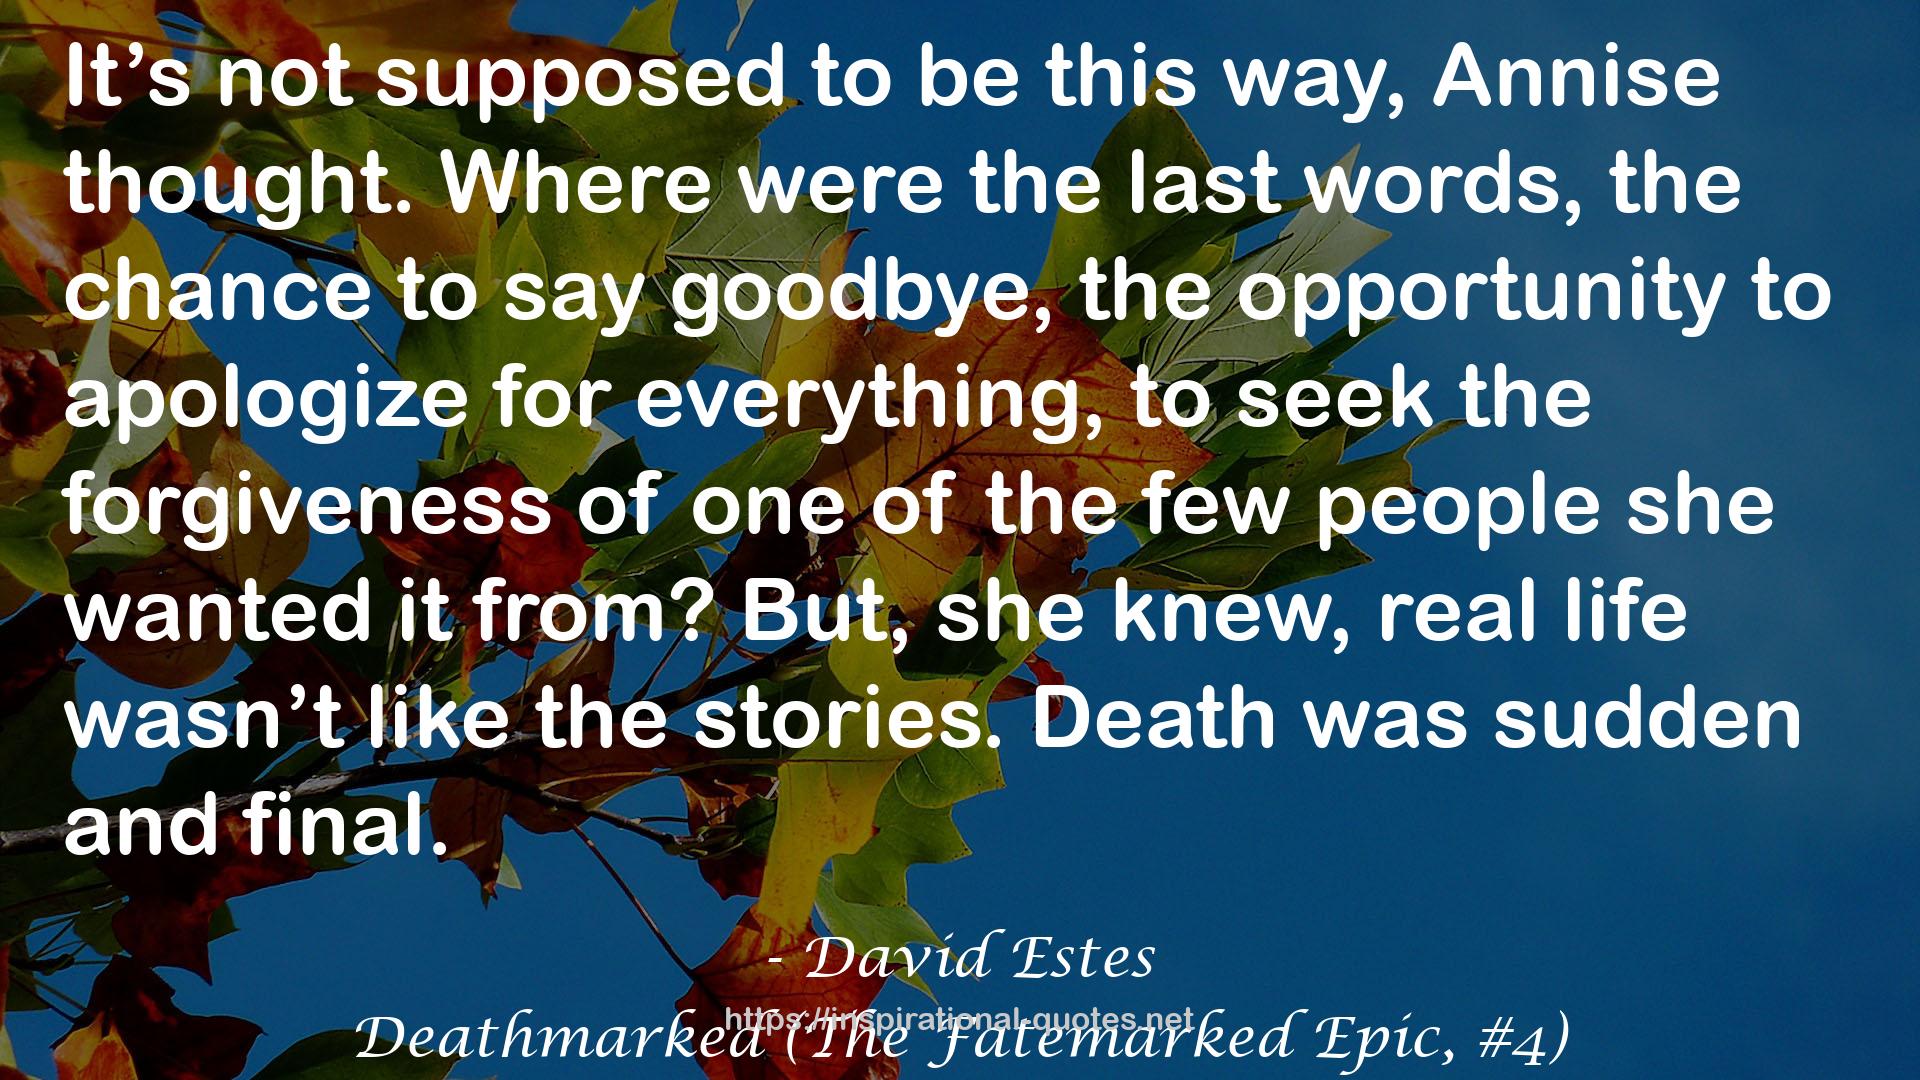 Deathmarked (The Fatemarked Epic, #4) QUOTES